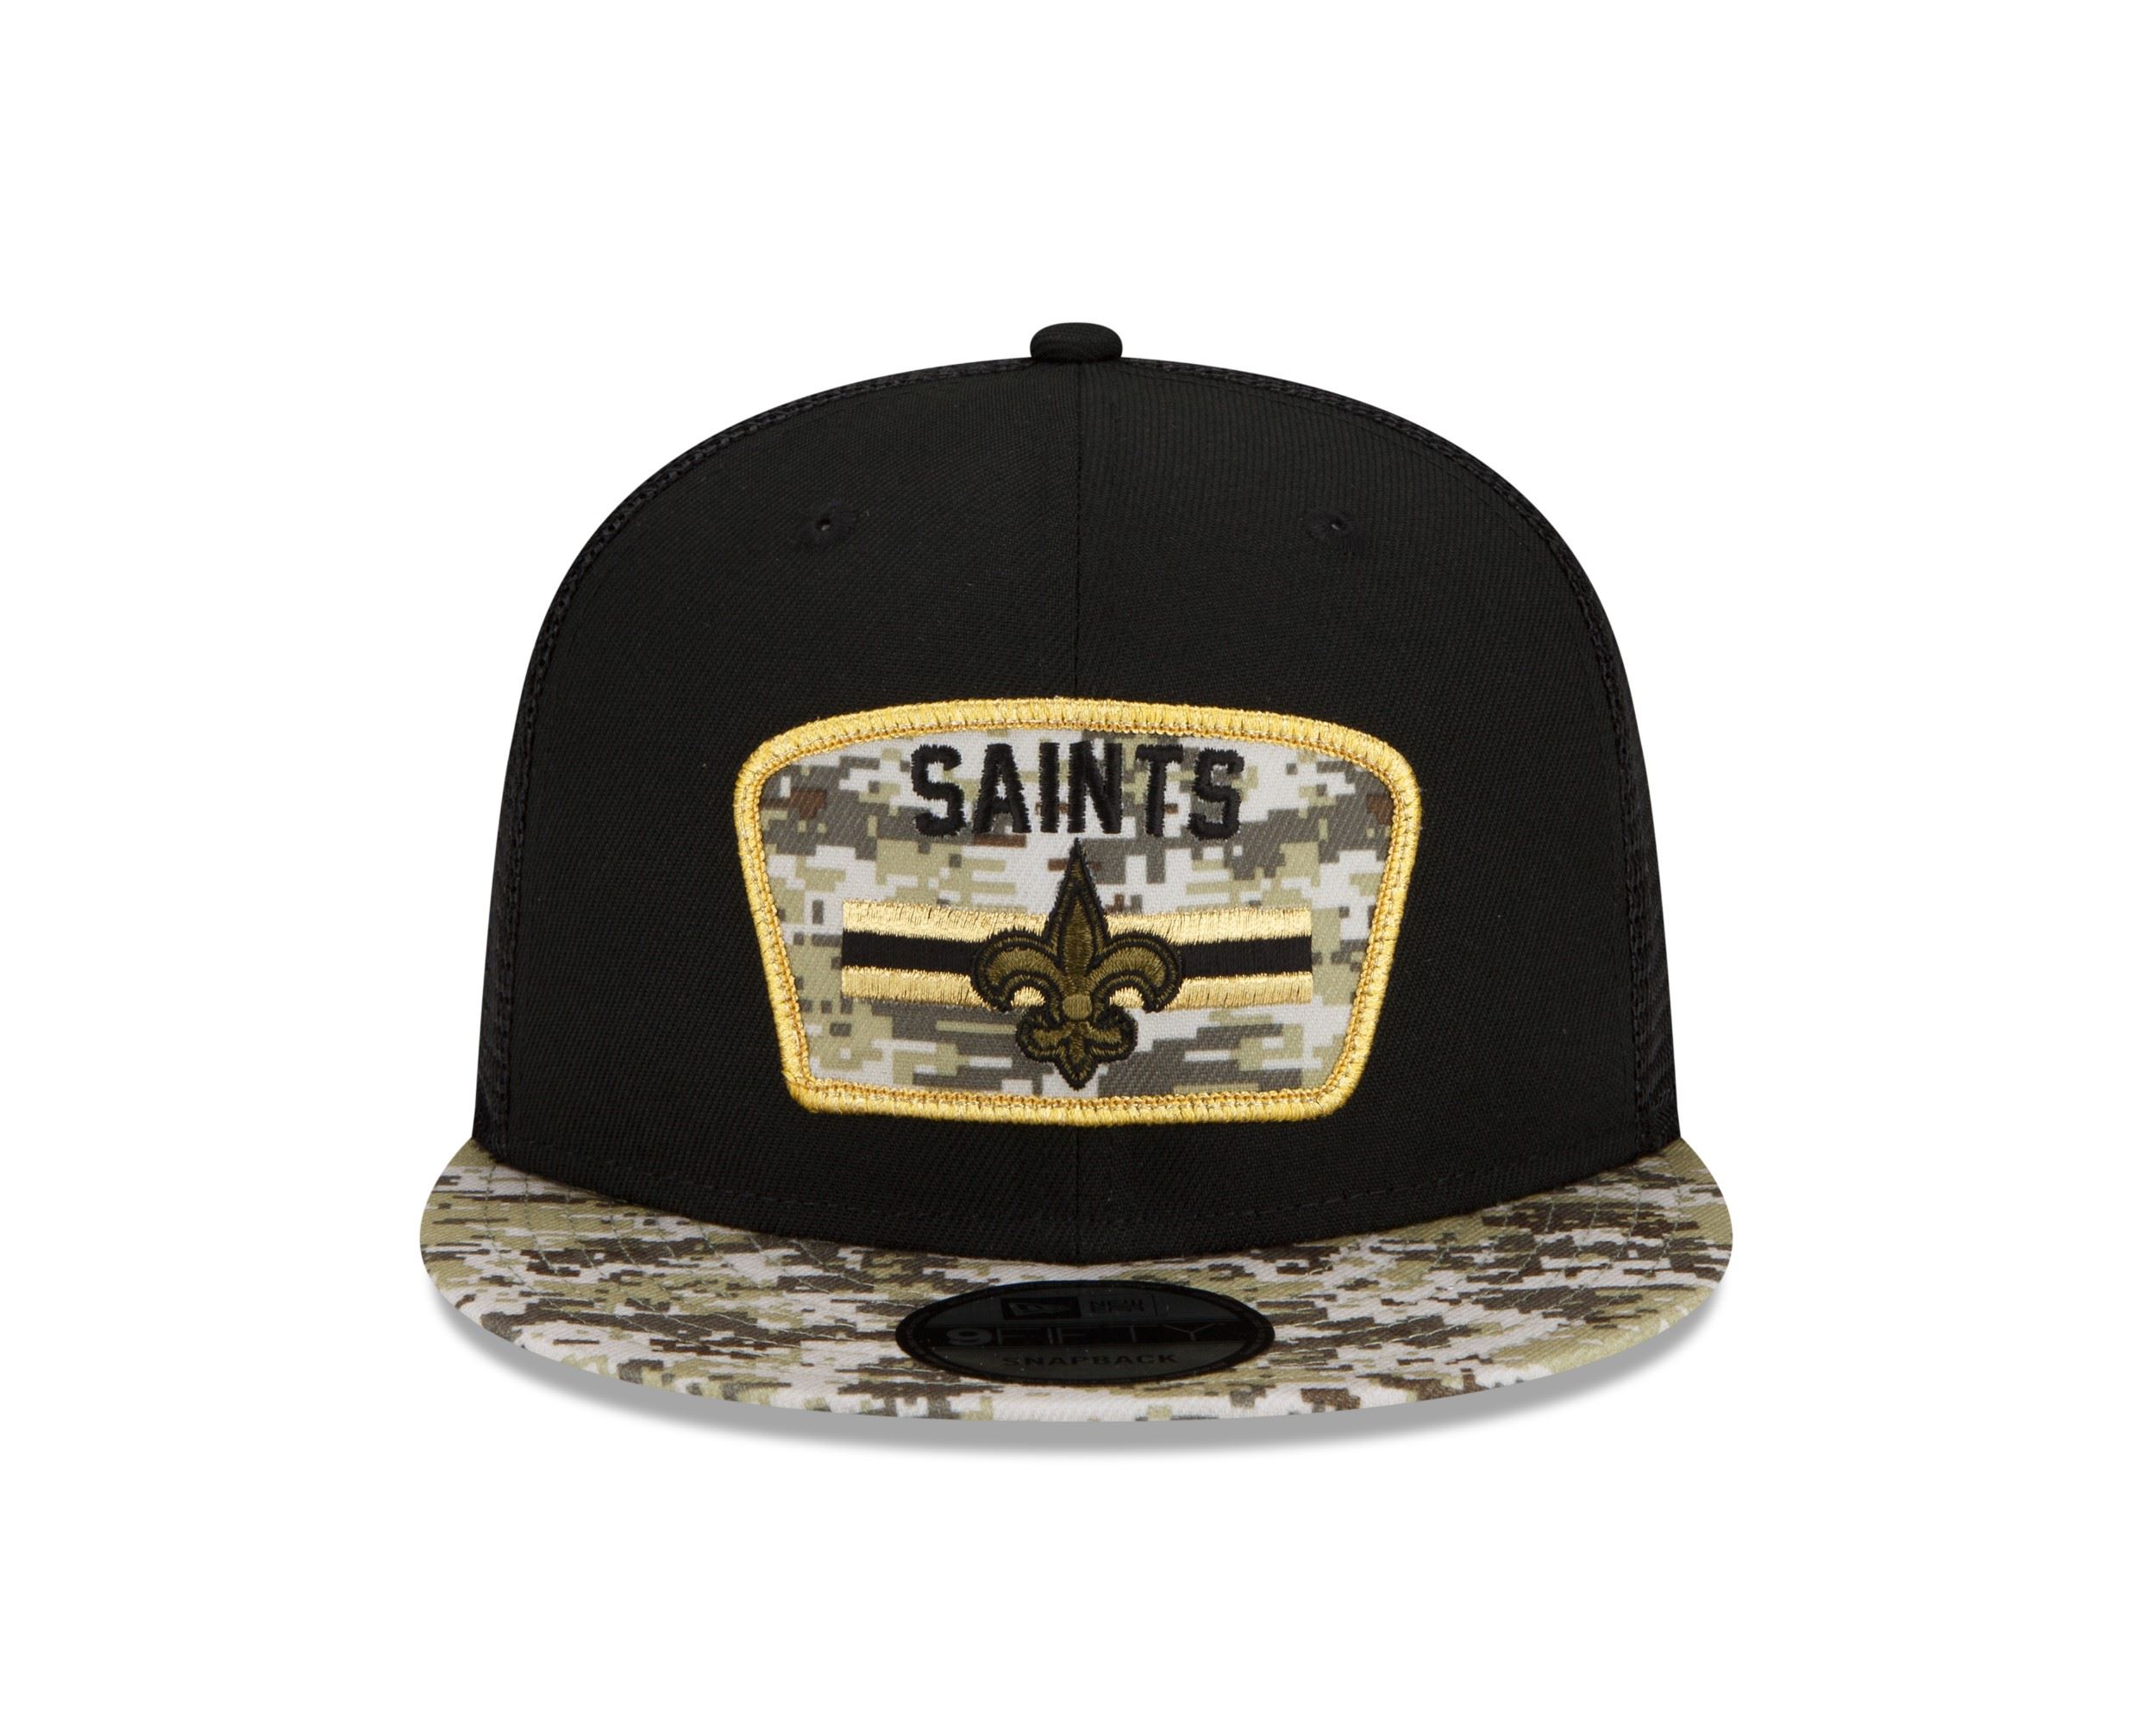 New Orleans Saints NFL On Field 2021 Salute to Service Black 9Fifty Snapback Cap New Era